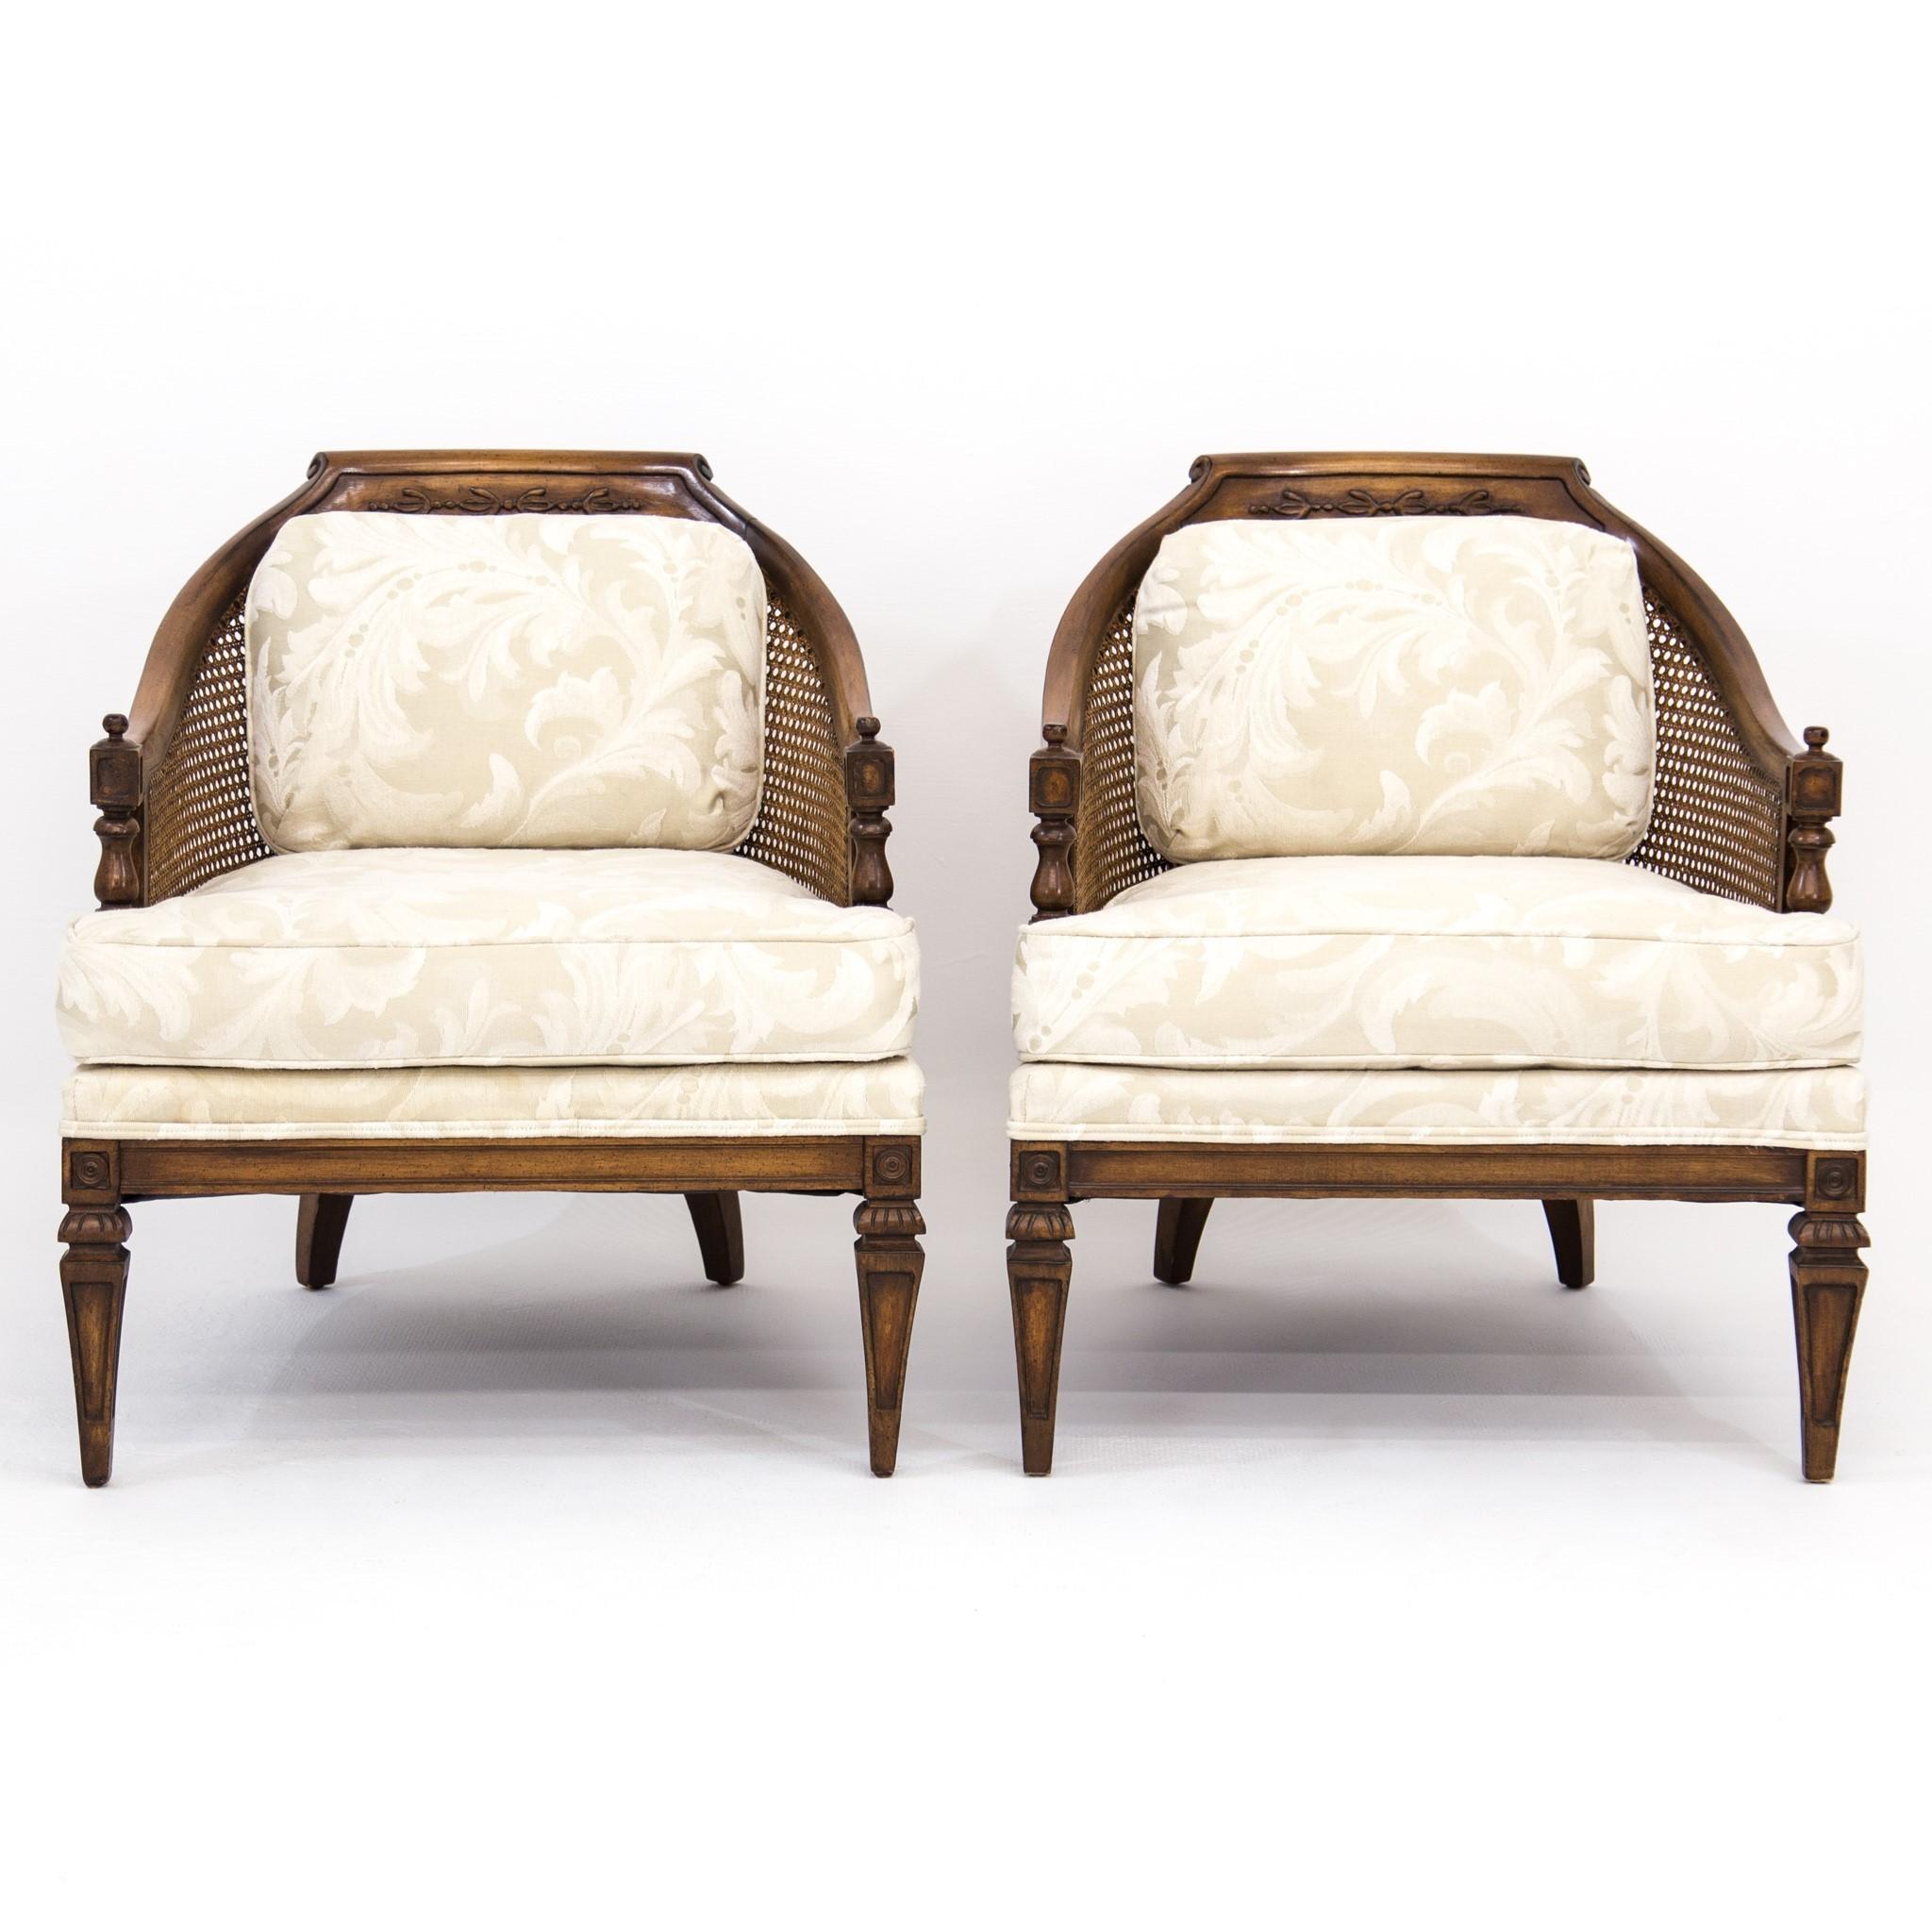 Pair of walnut and caned barrel back tub lounge chairs with carved detail and ivory and cream brocade floral upholstery, circa 1970s. They feature carved and scrolled crested top rails ending in swoop arms in horseshoe form above Louis XVI-style